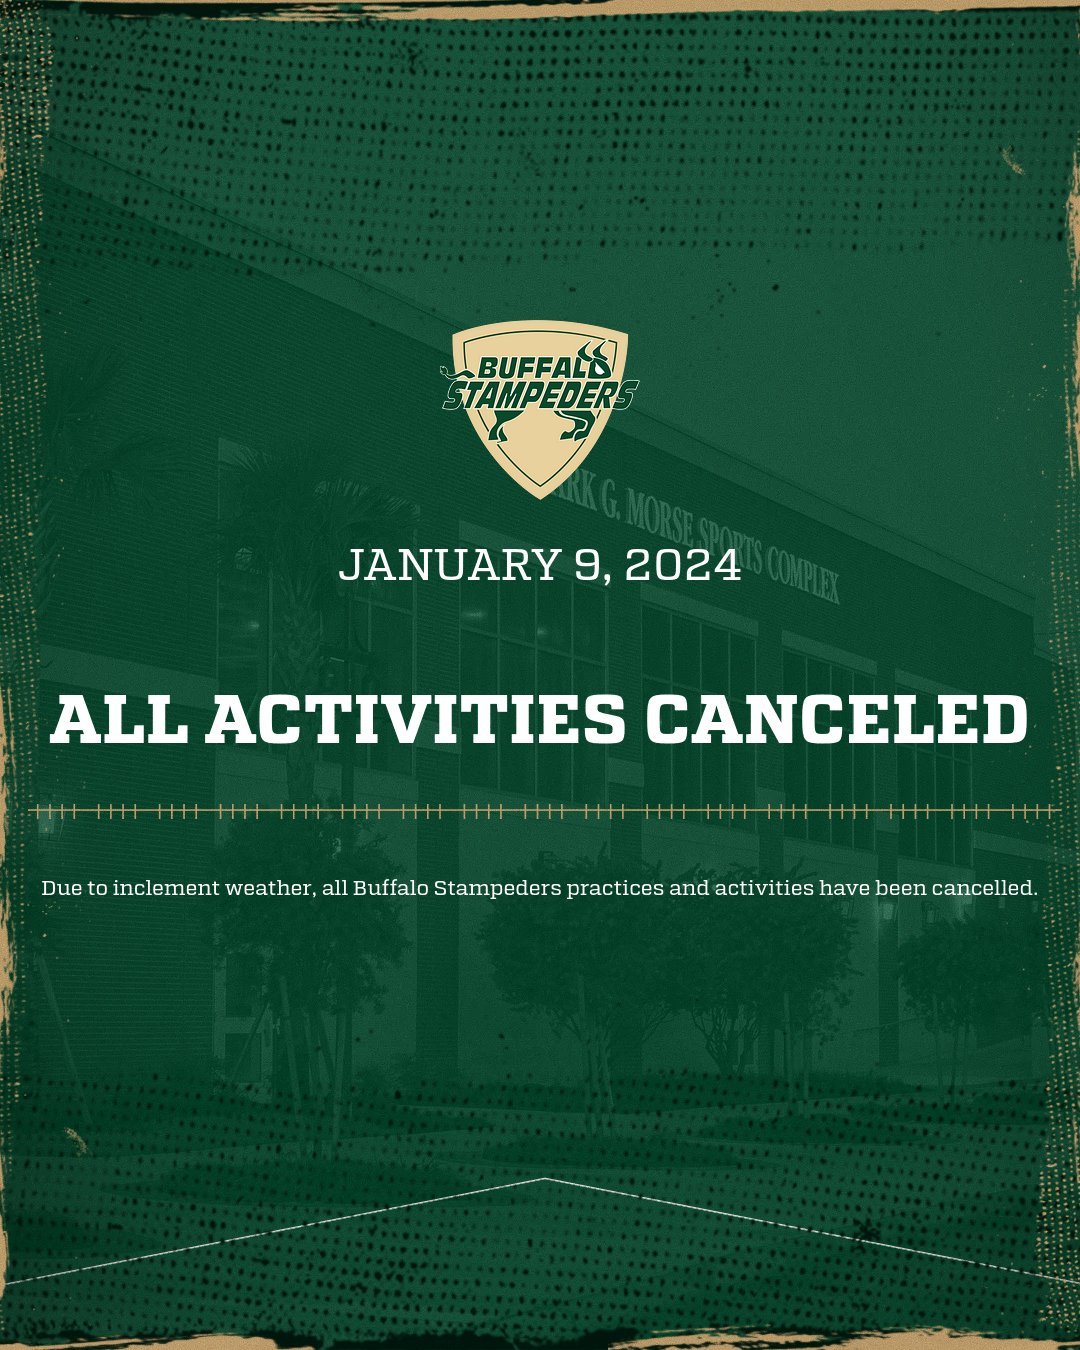 BREAKING NEWS: Due to inclement weather, all Buffalo Stampeders Activities have been cancelled for Tuesday, January 9th.